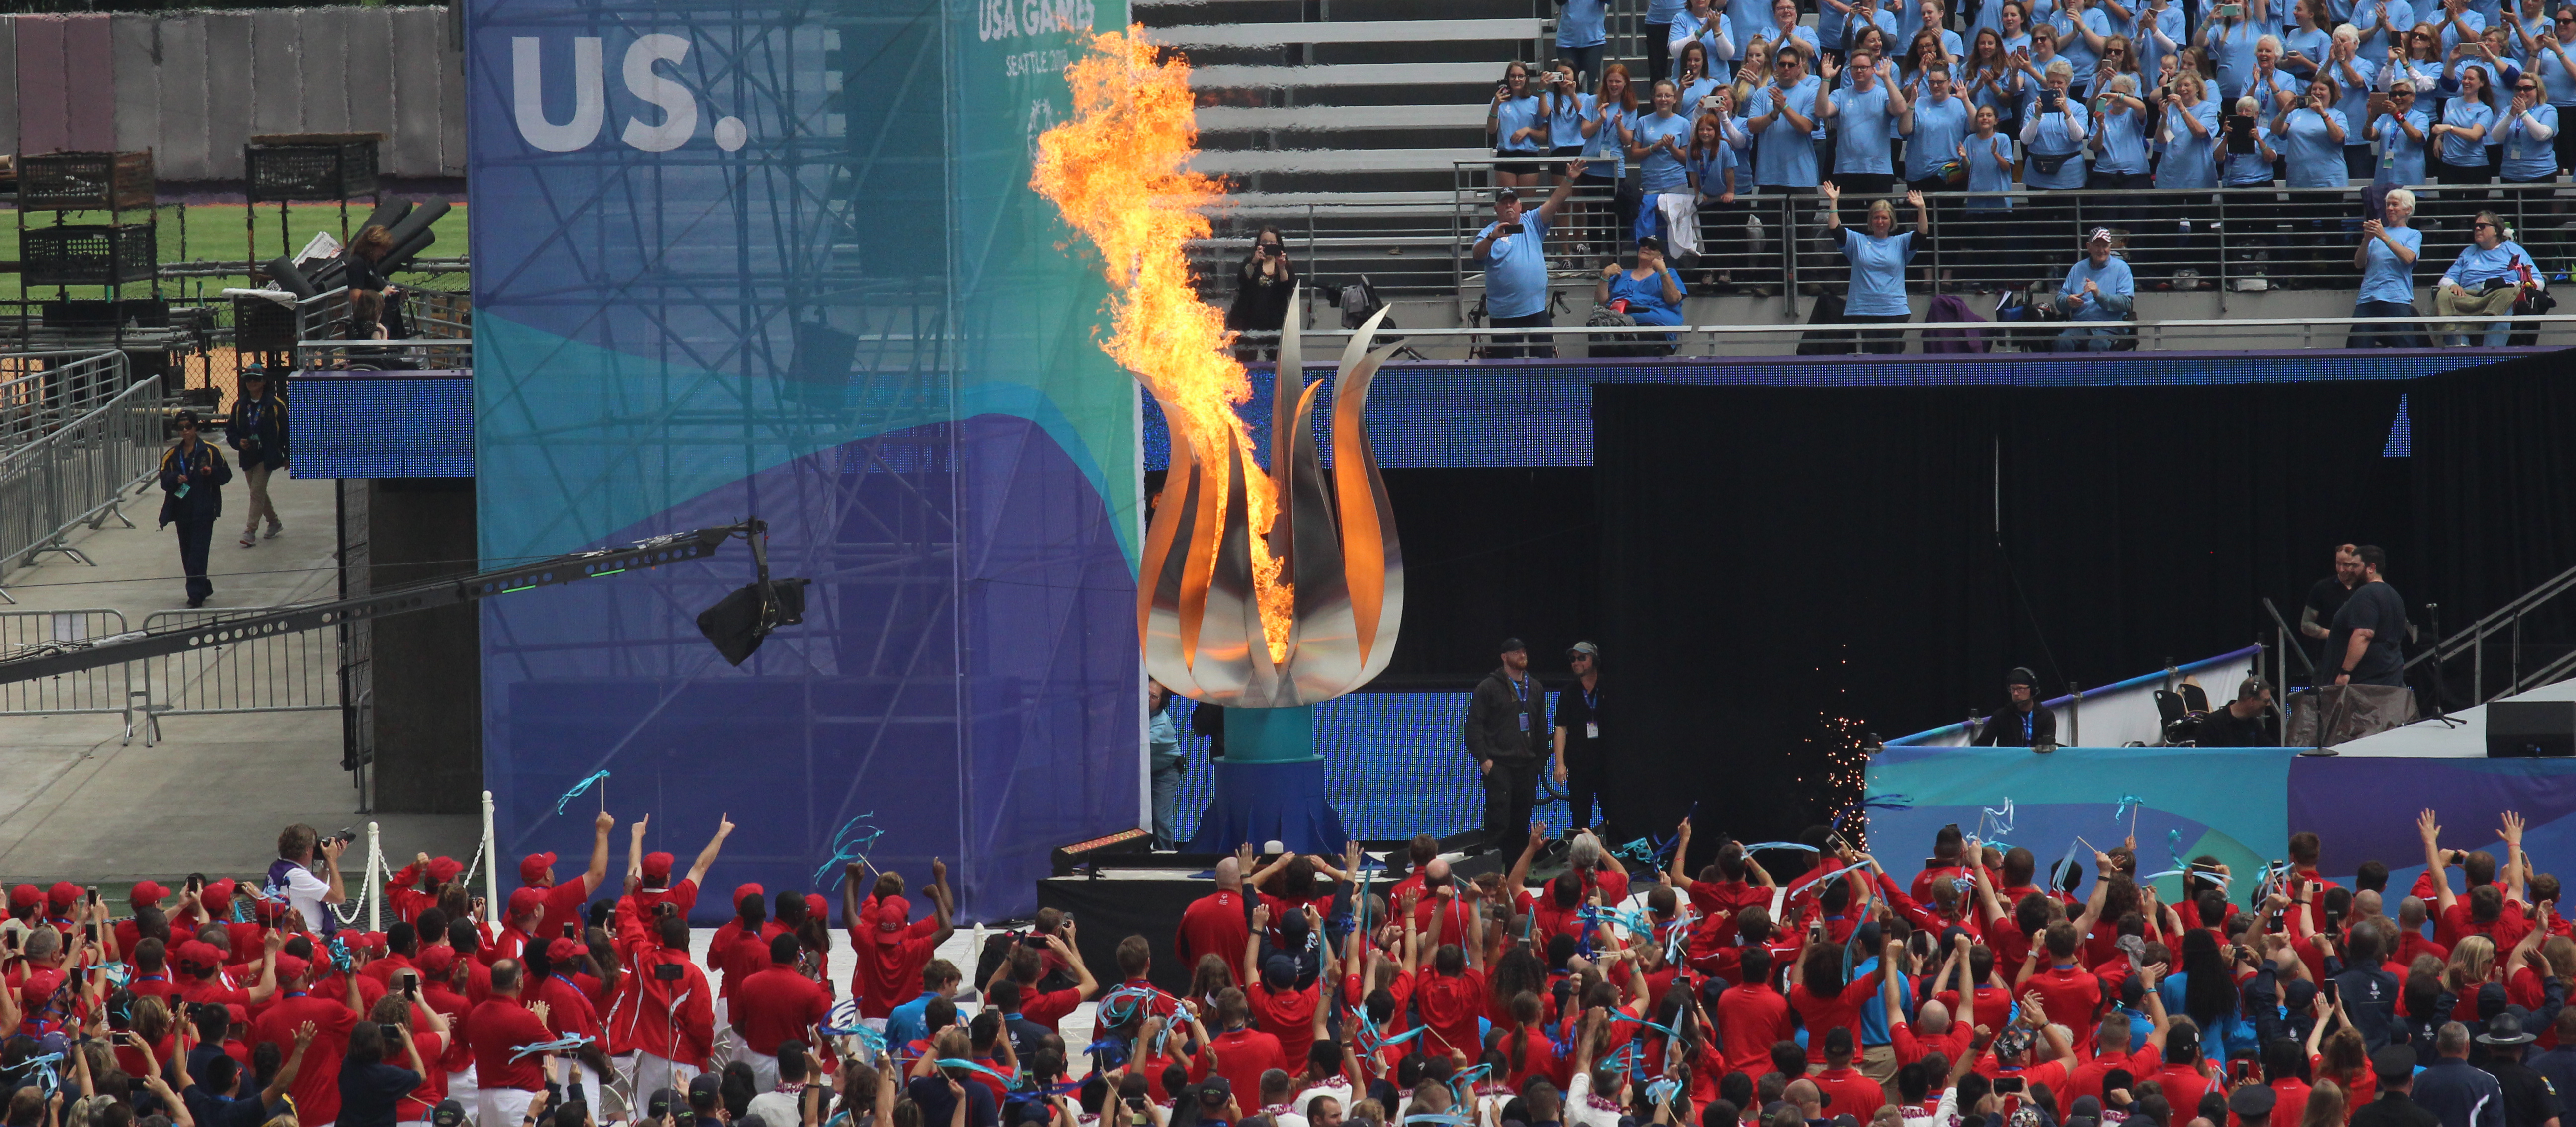 Today at the USA Games – July 1